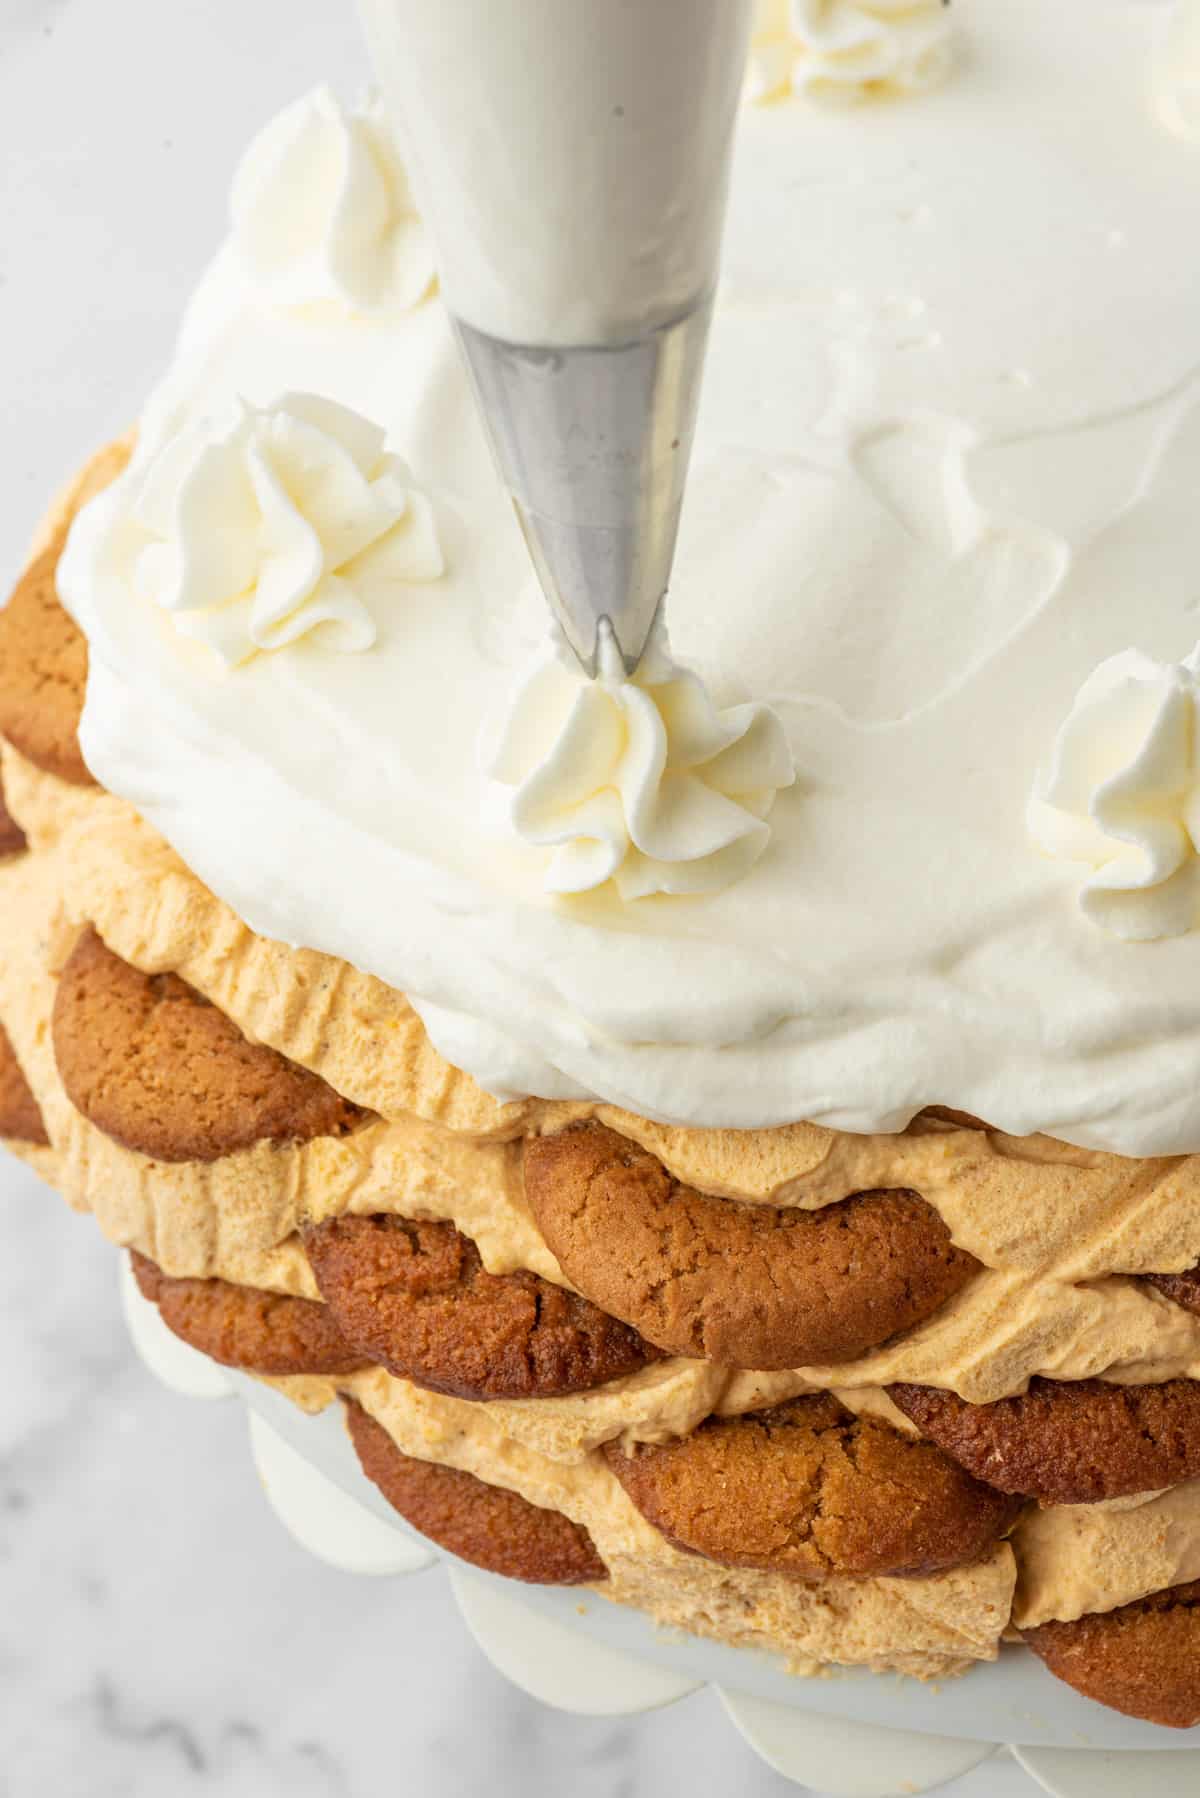 Whipped cream is being piped onto an icebox cake.